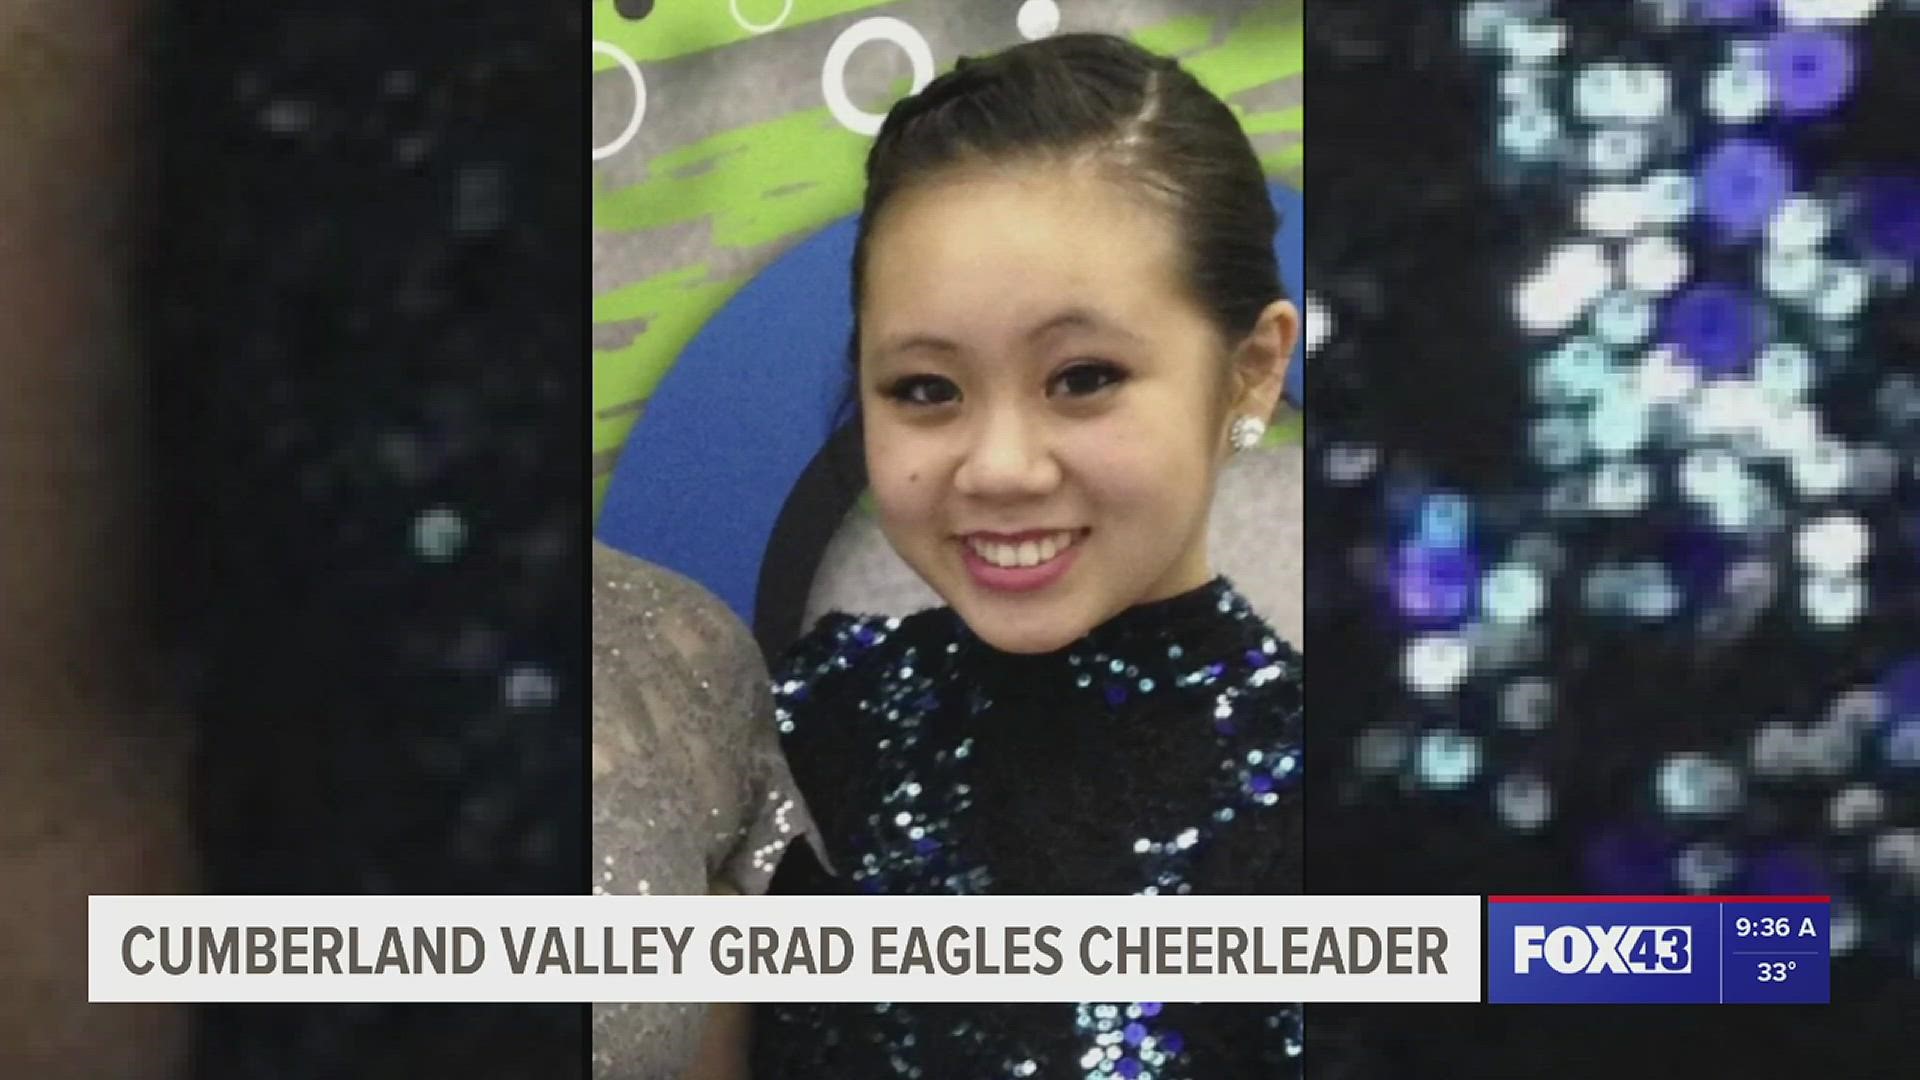 Laura Chau is in her rookie season as a Philadelphia Eagles Cheerleader, and cheering in her first Super Bowl.